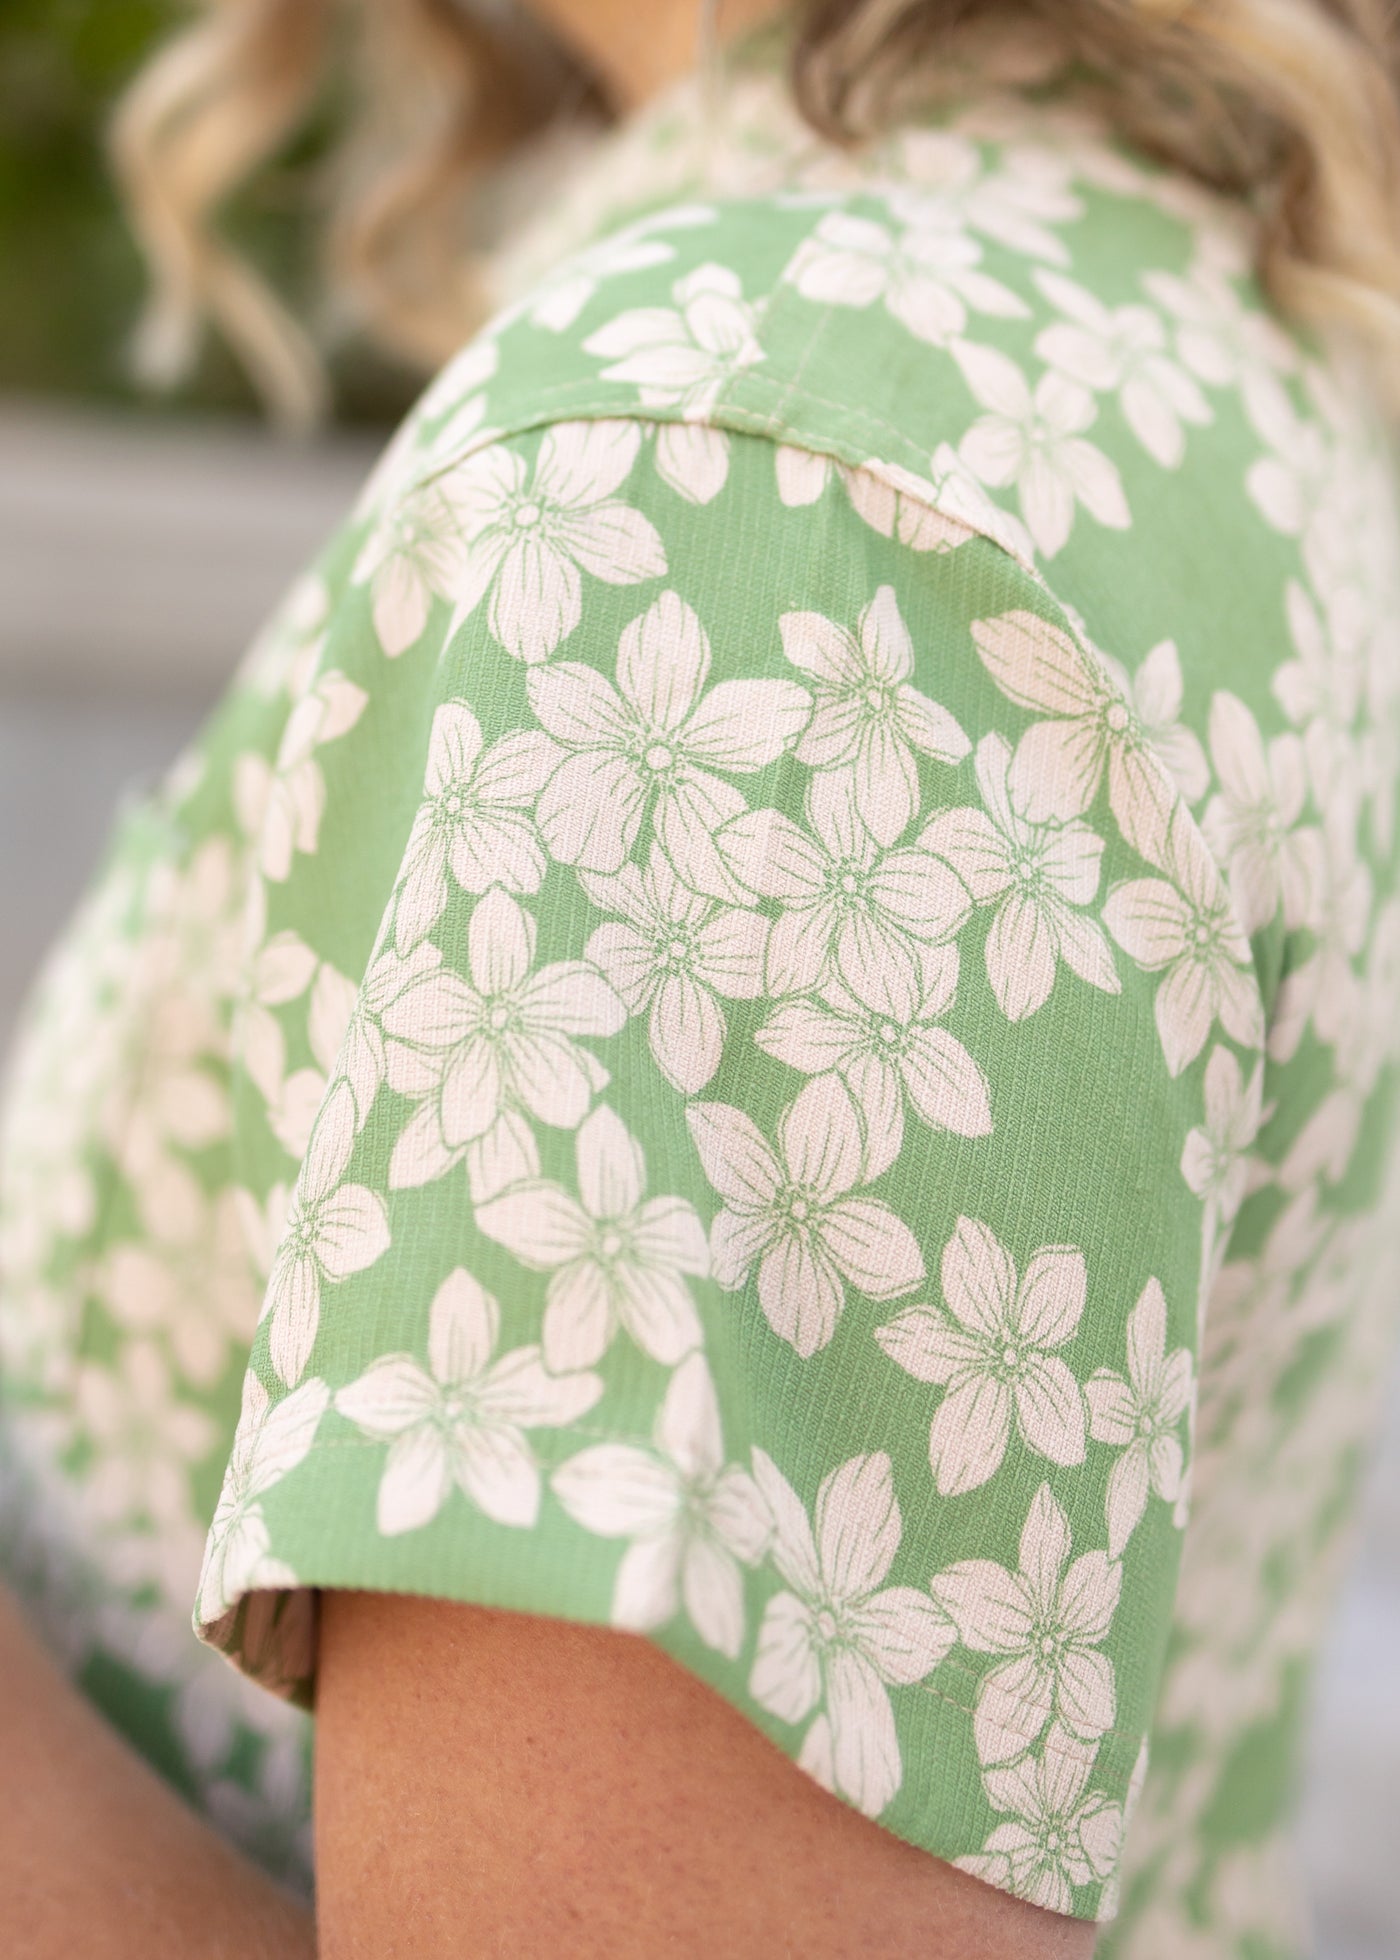 Short sleeve green floral dress with cream flowers